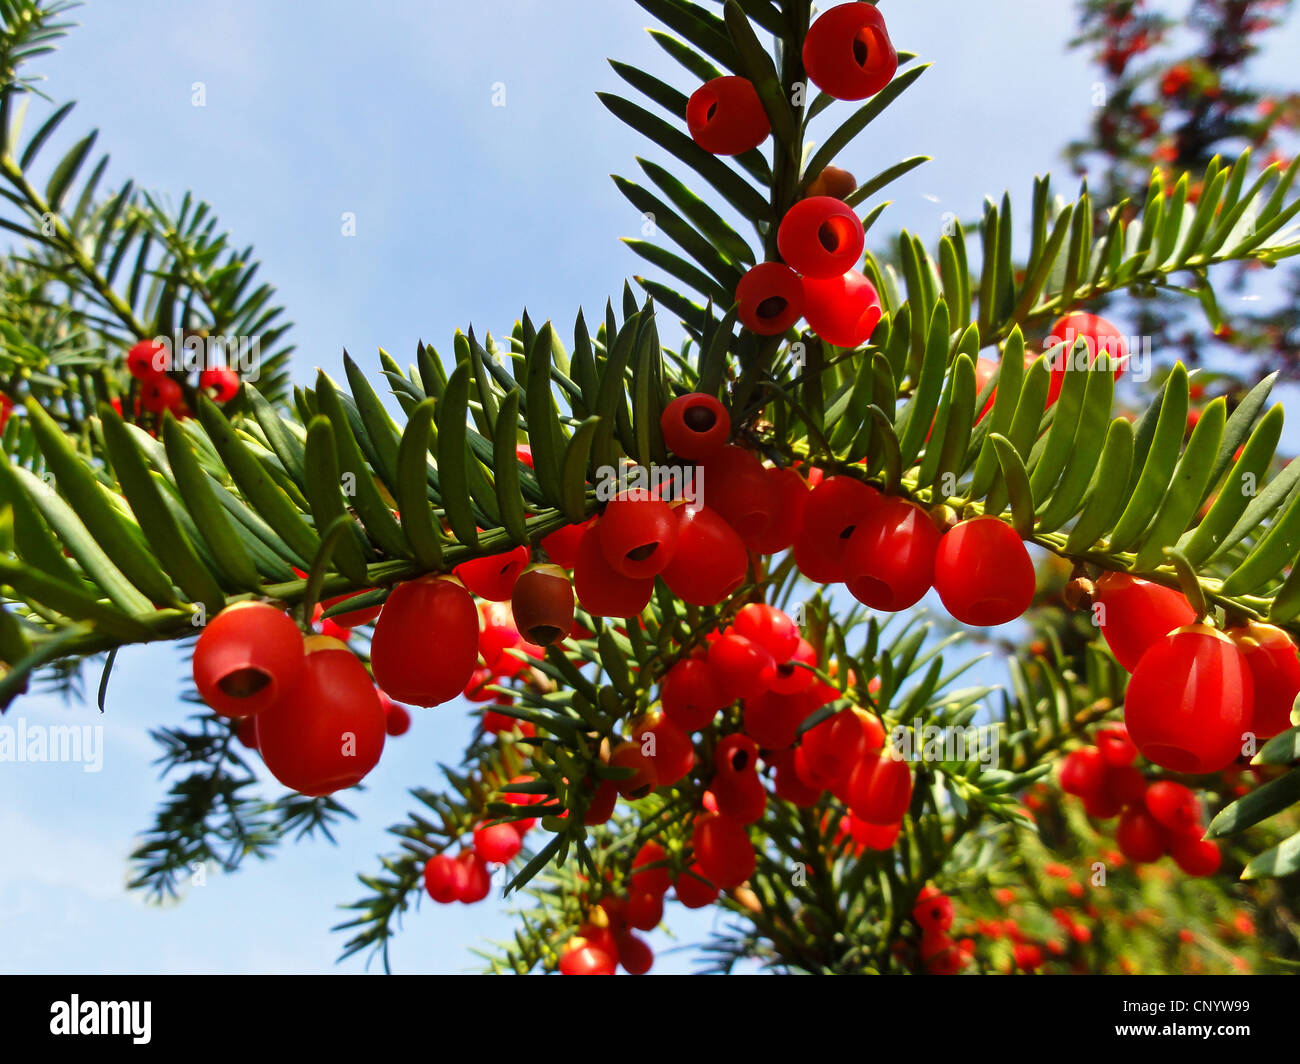 common yew (Taxus baccata), with red seeds on a branch, Germany Stock Photo